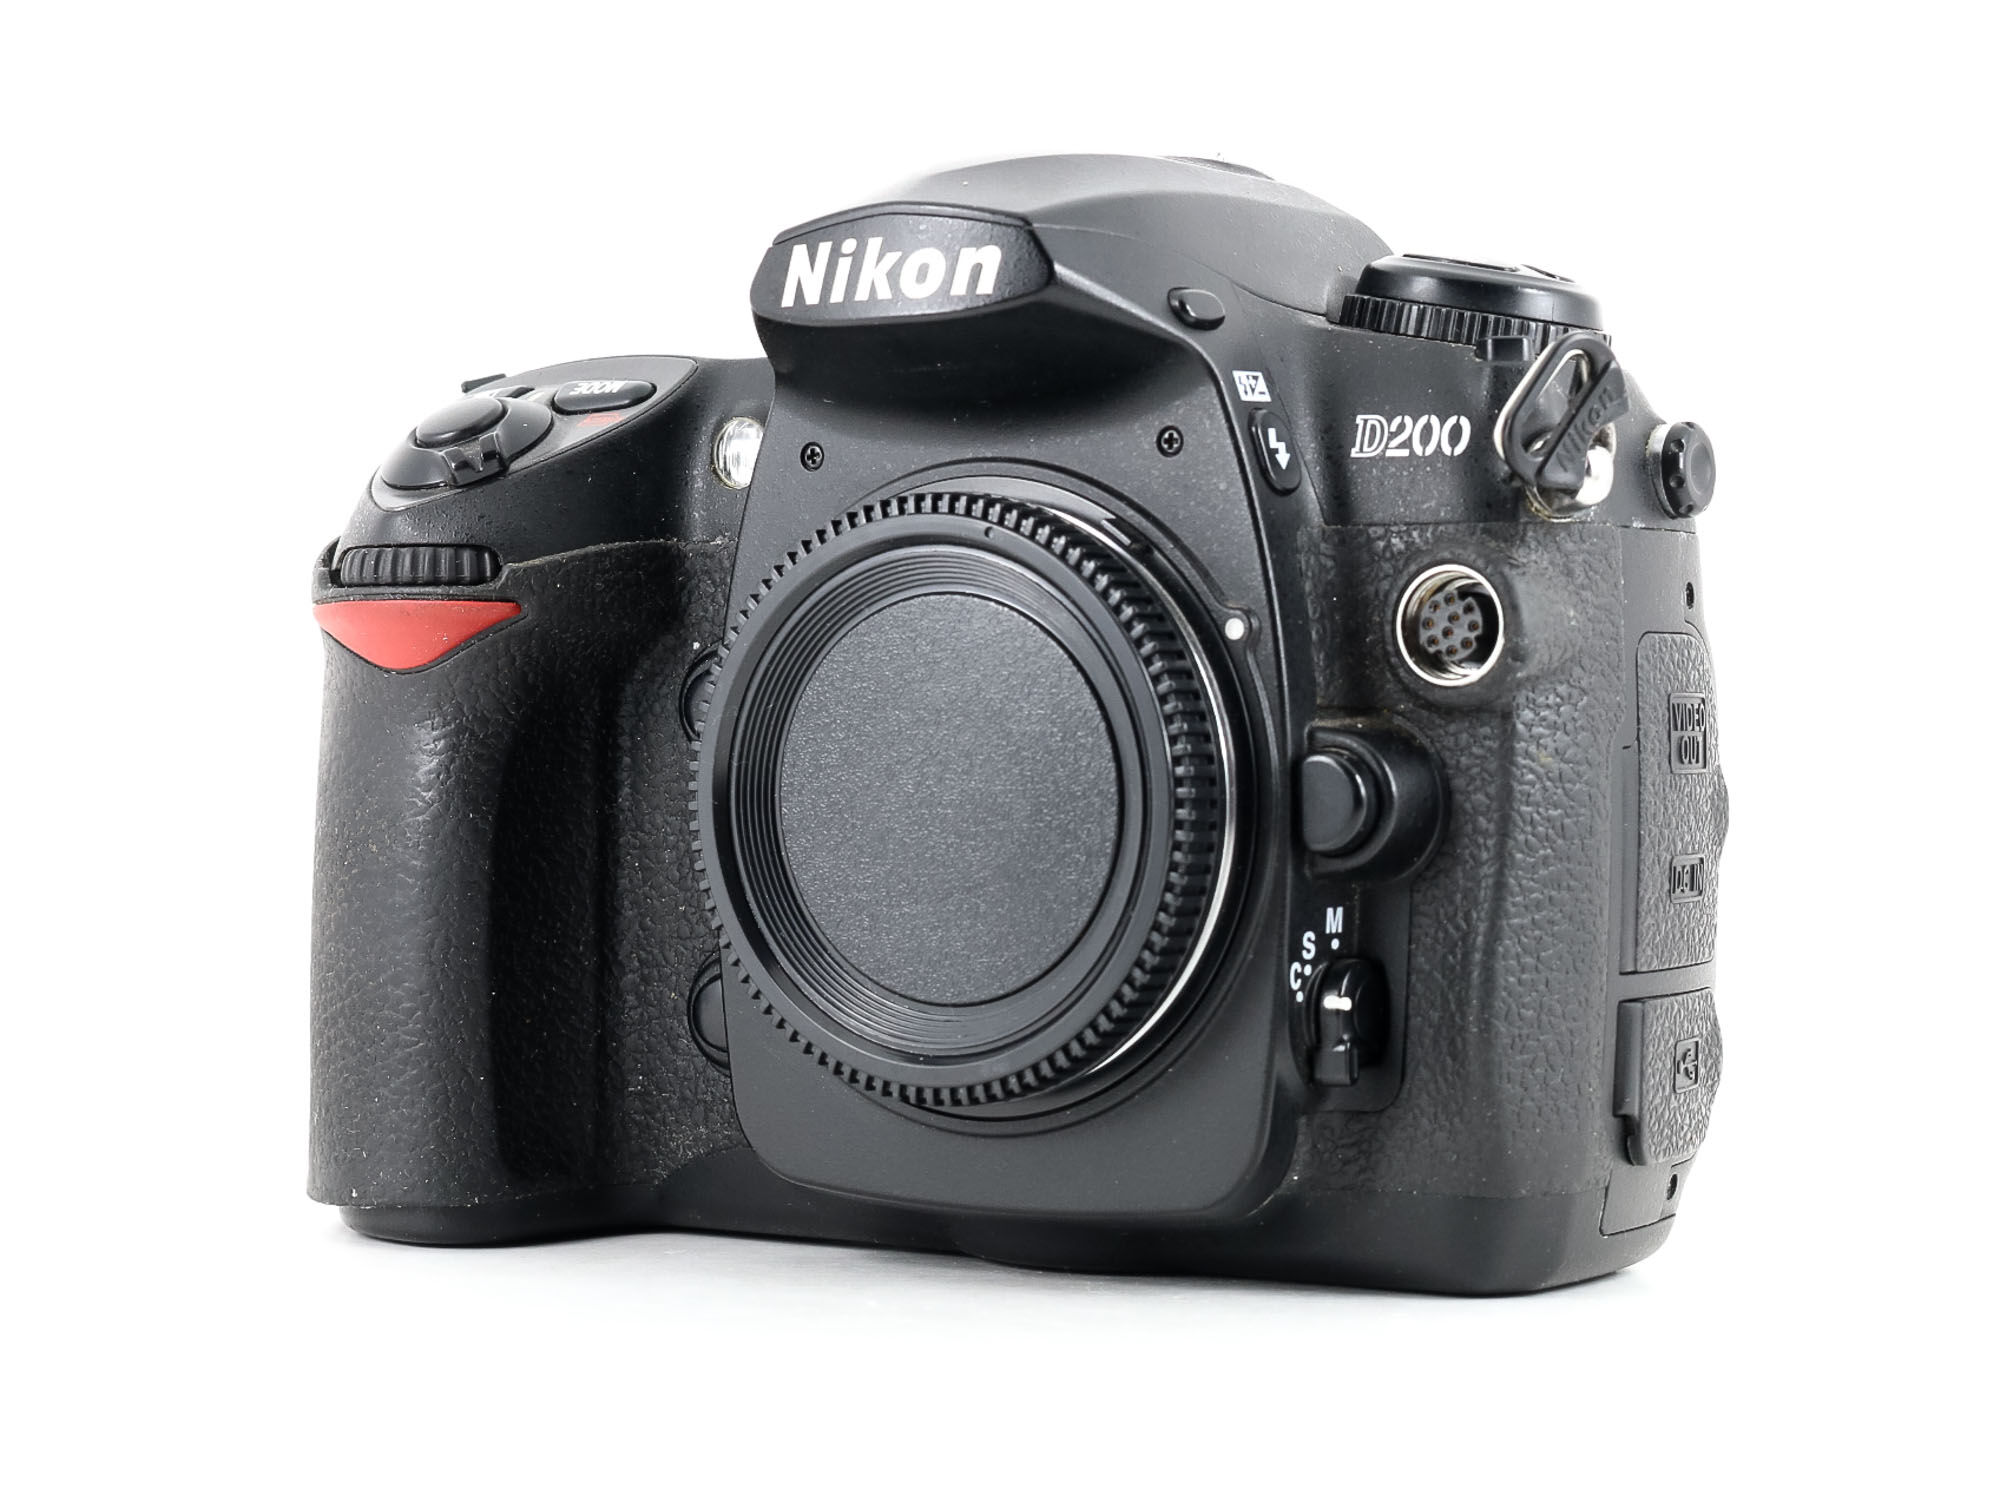 Nikon D200 (Condition: Well Used)